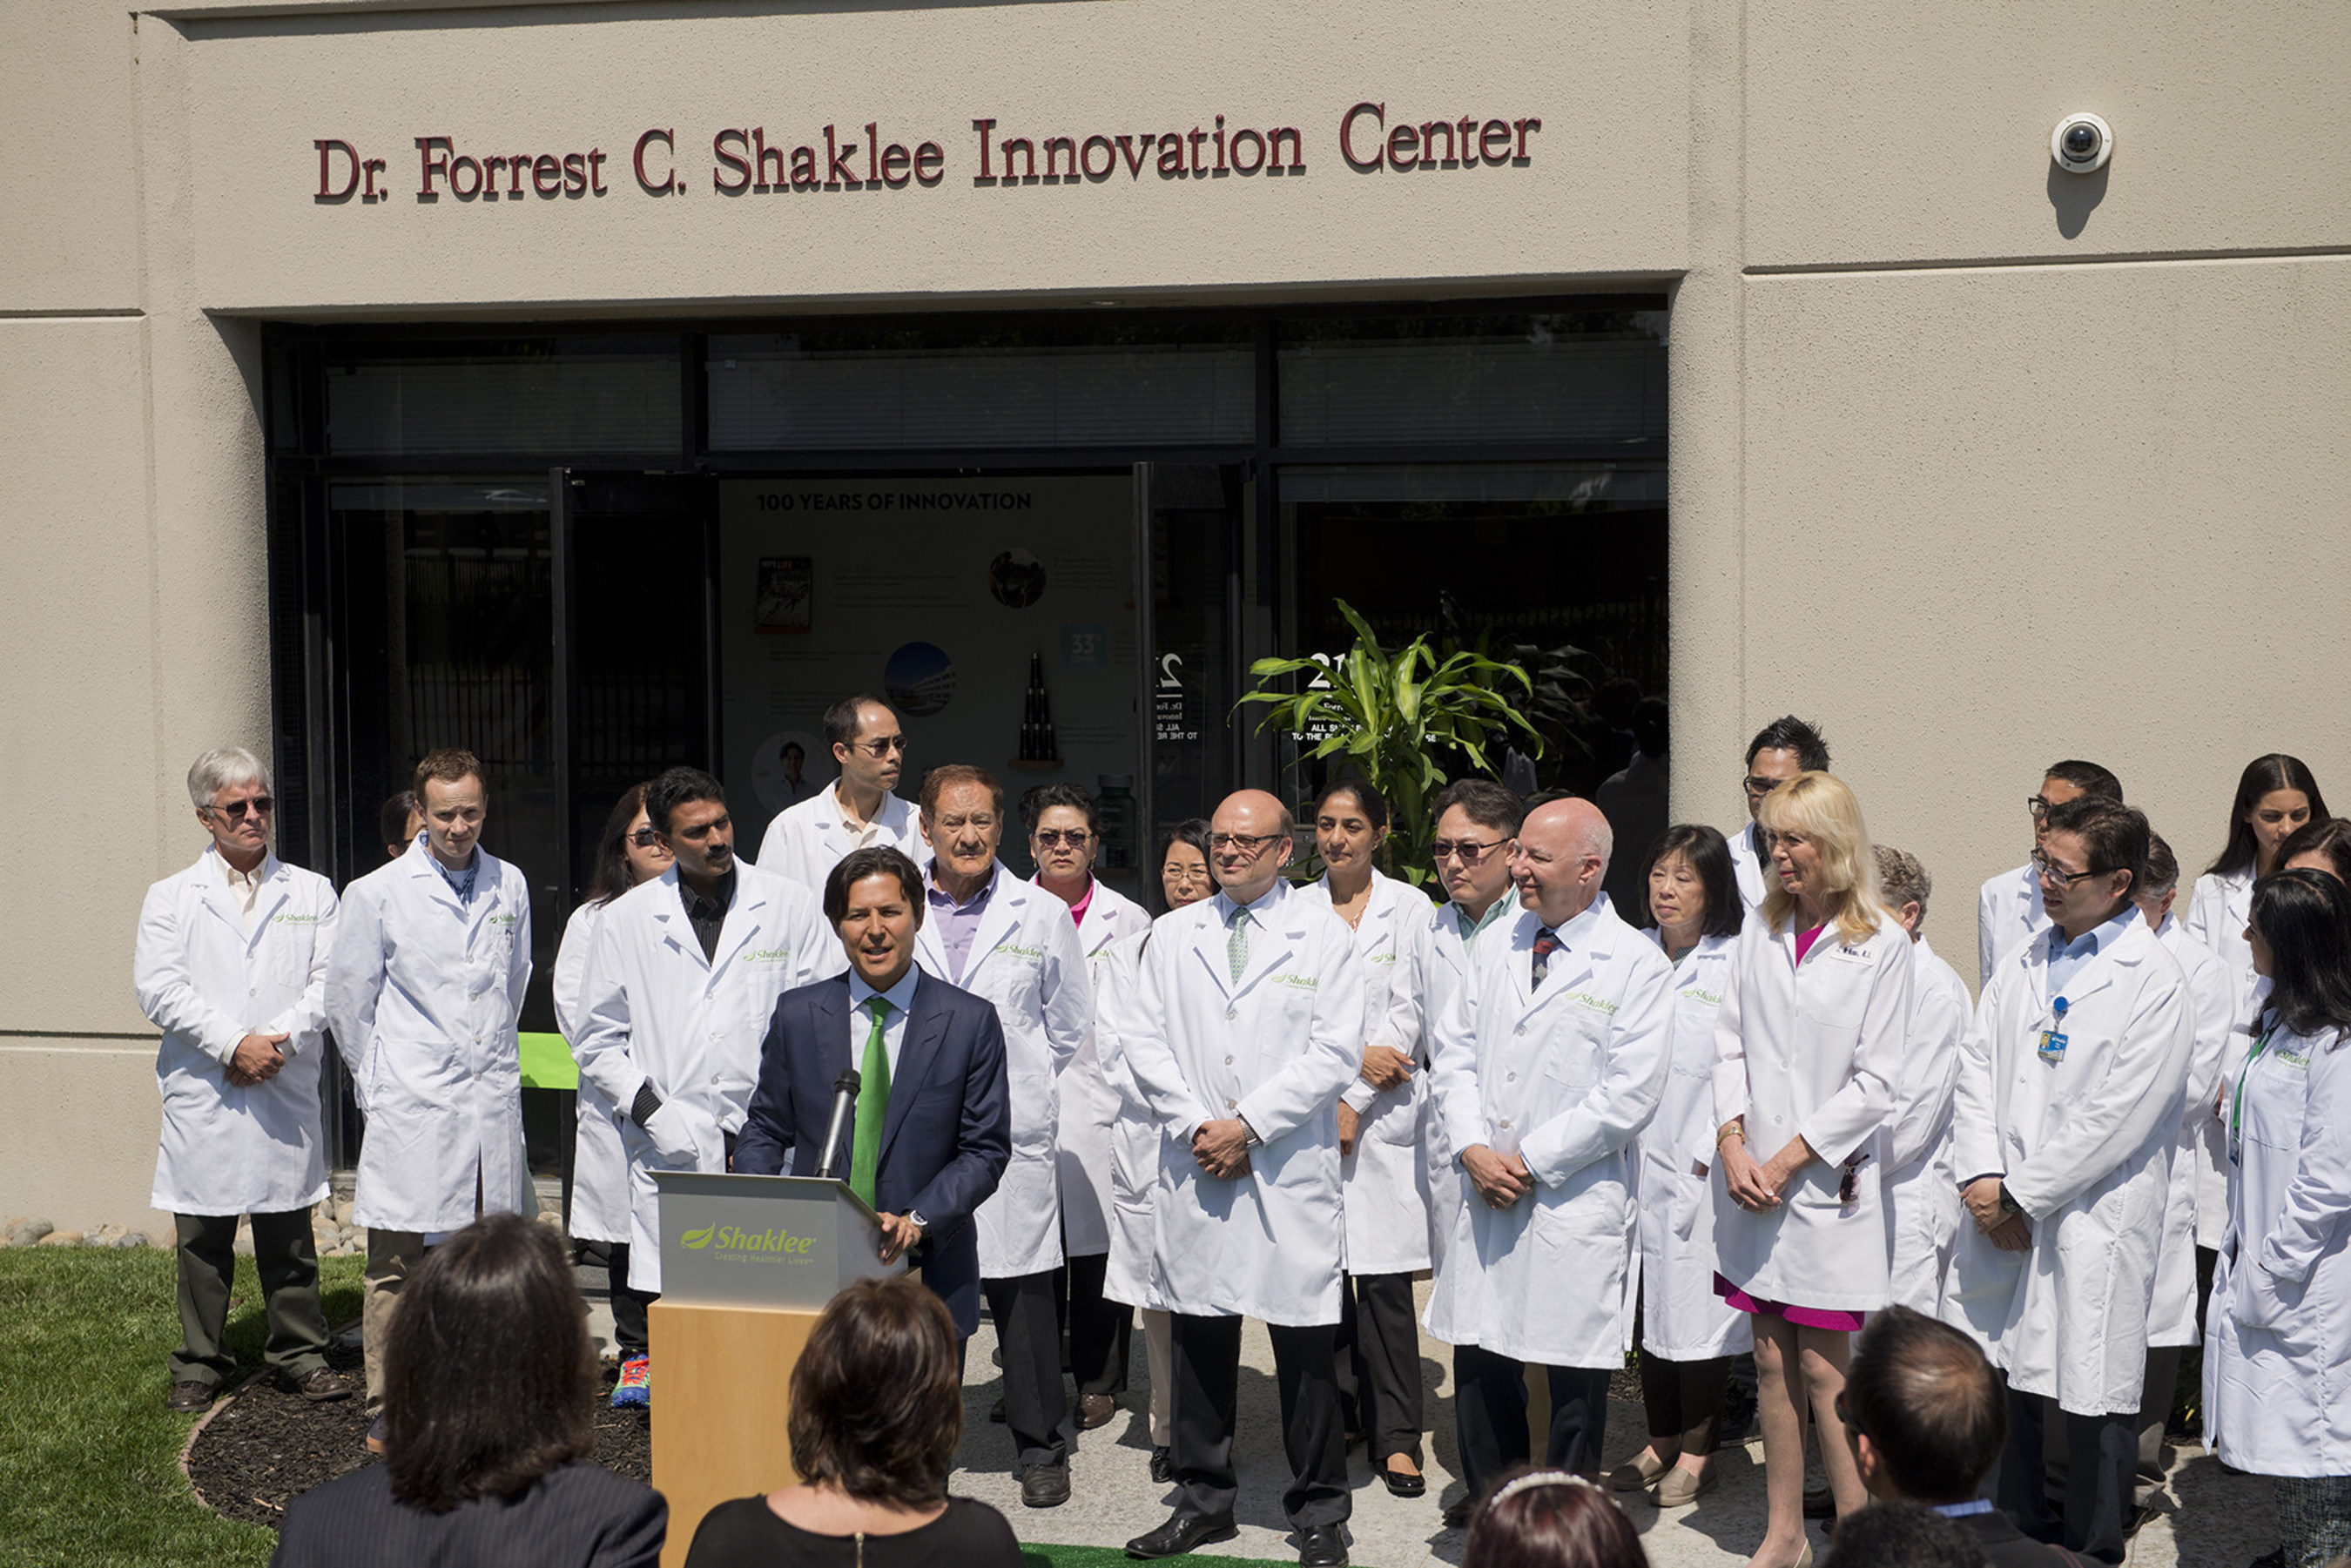 On Monday April 20, Shaklee, leader in natural health & wellness products, opened the Dr. Forrest C. Shaklee Global Innovation Center in Pleasanton, California, near Shaklee World Headquarters. Leading the ceremony was Shaklee Chairman and CEO Roger Barnett, who discussed the importance of innovation, accompanied by Shaklee scientists.